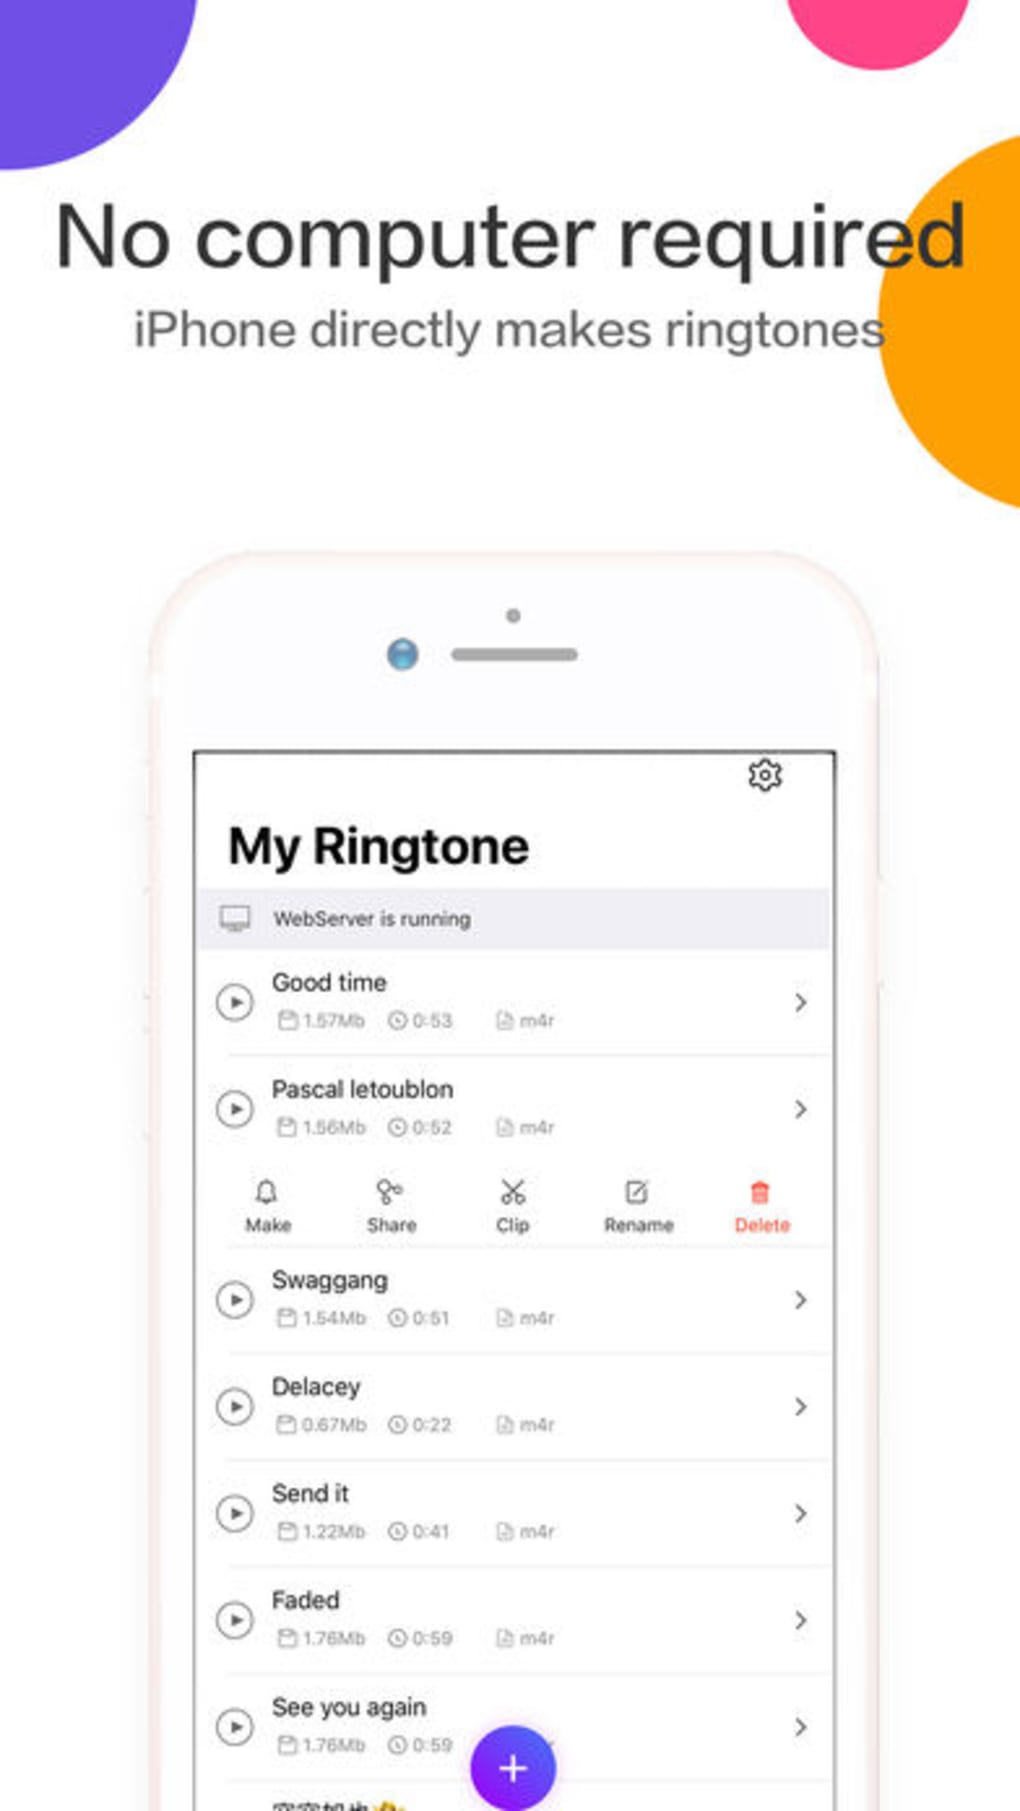 Old Phone Ringtones:Amazon.com:Appstore for Android